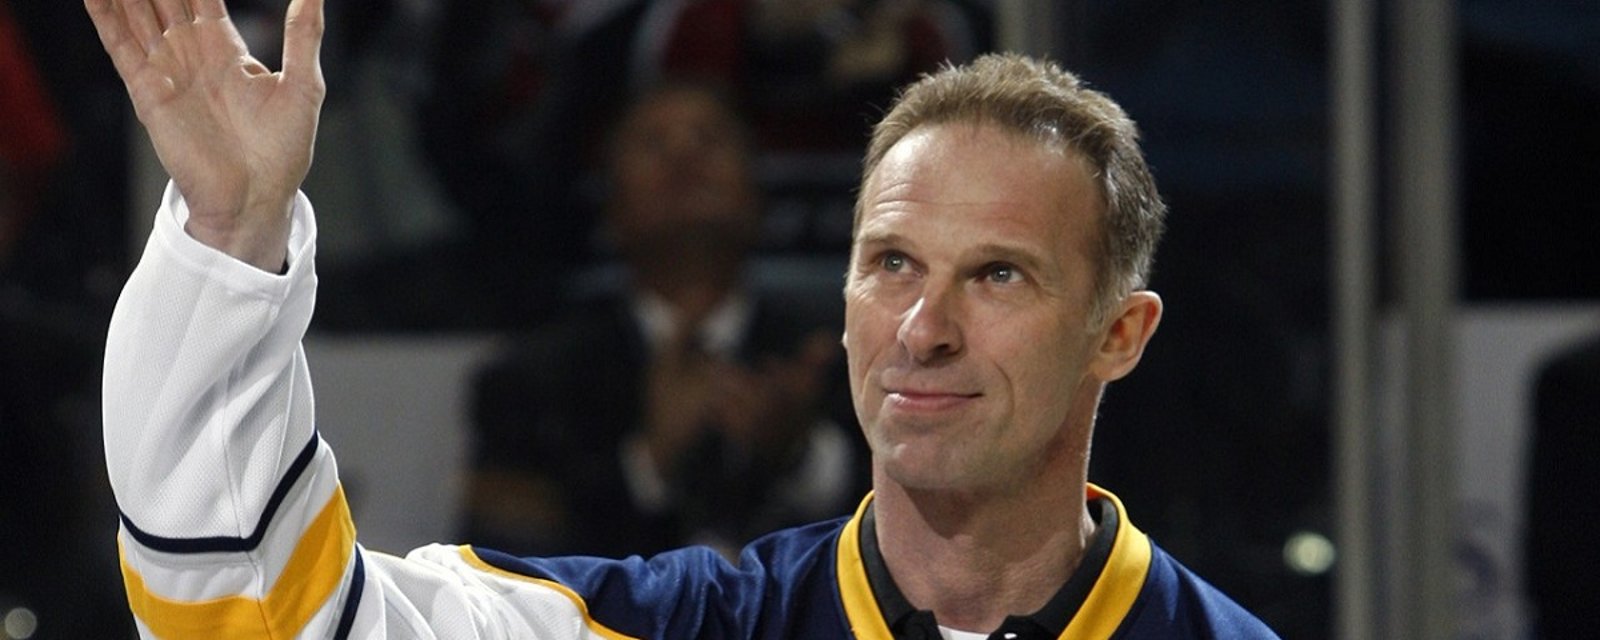 ICYMI: Dominik Hasek delivers a beautiful message to Patrick Kane.